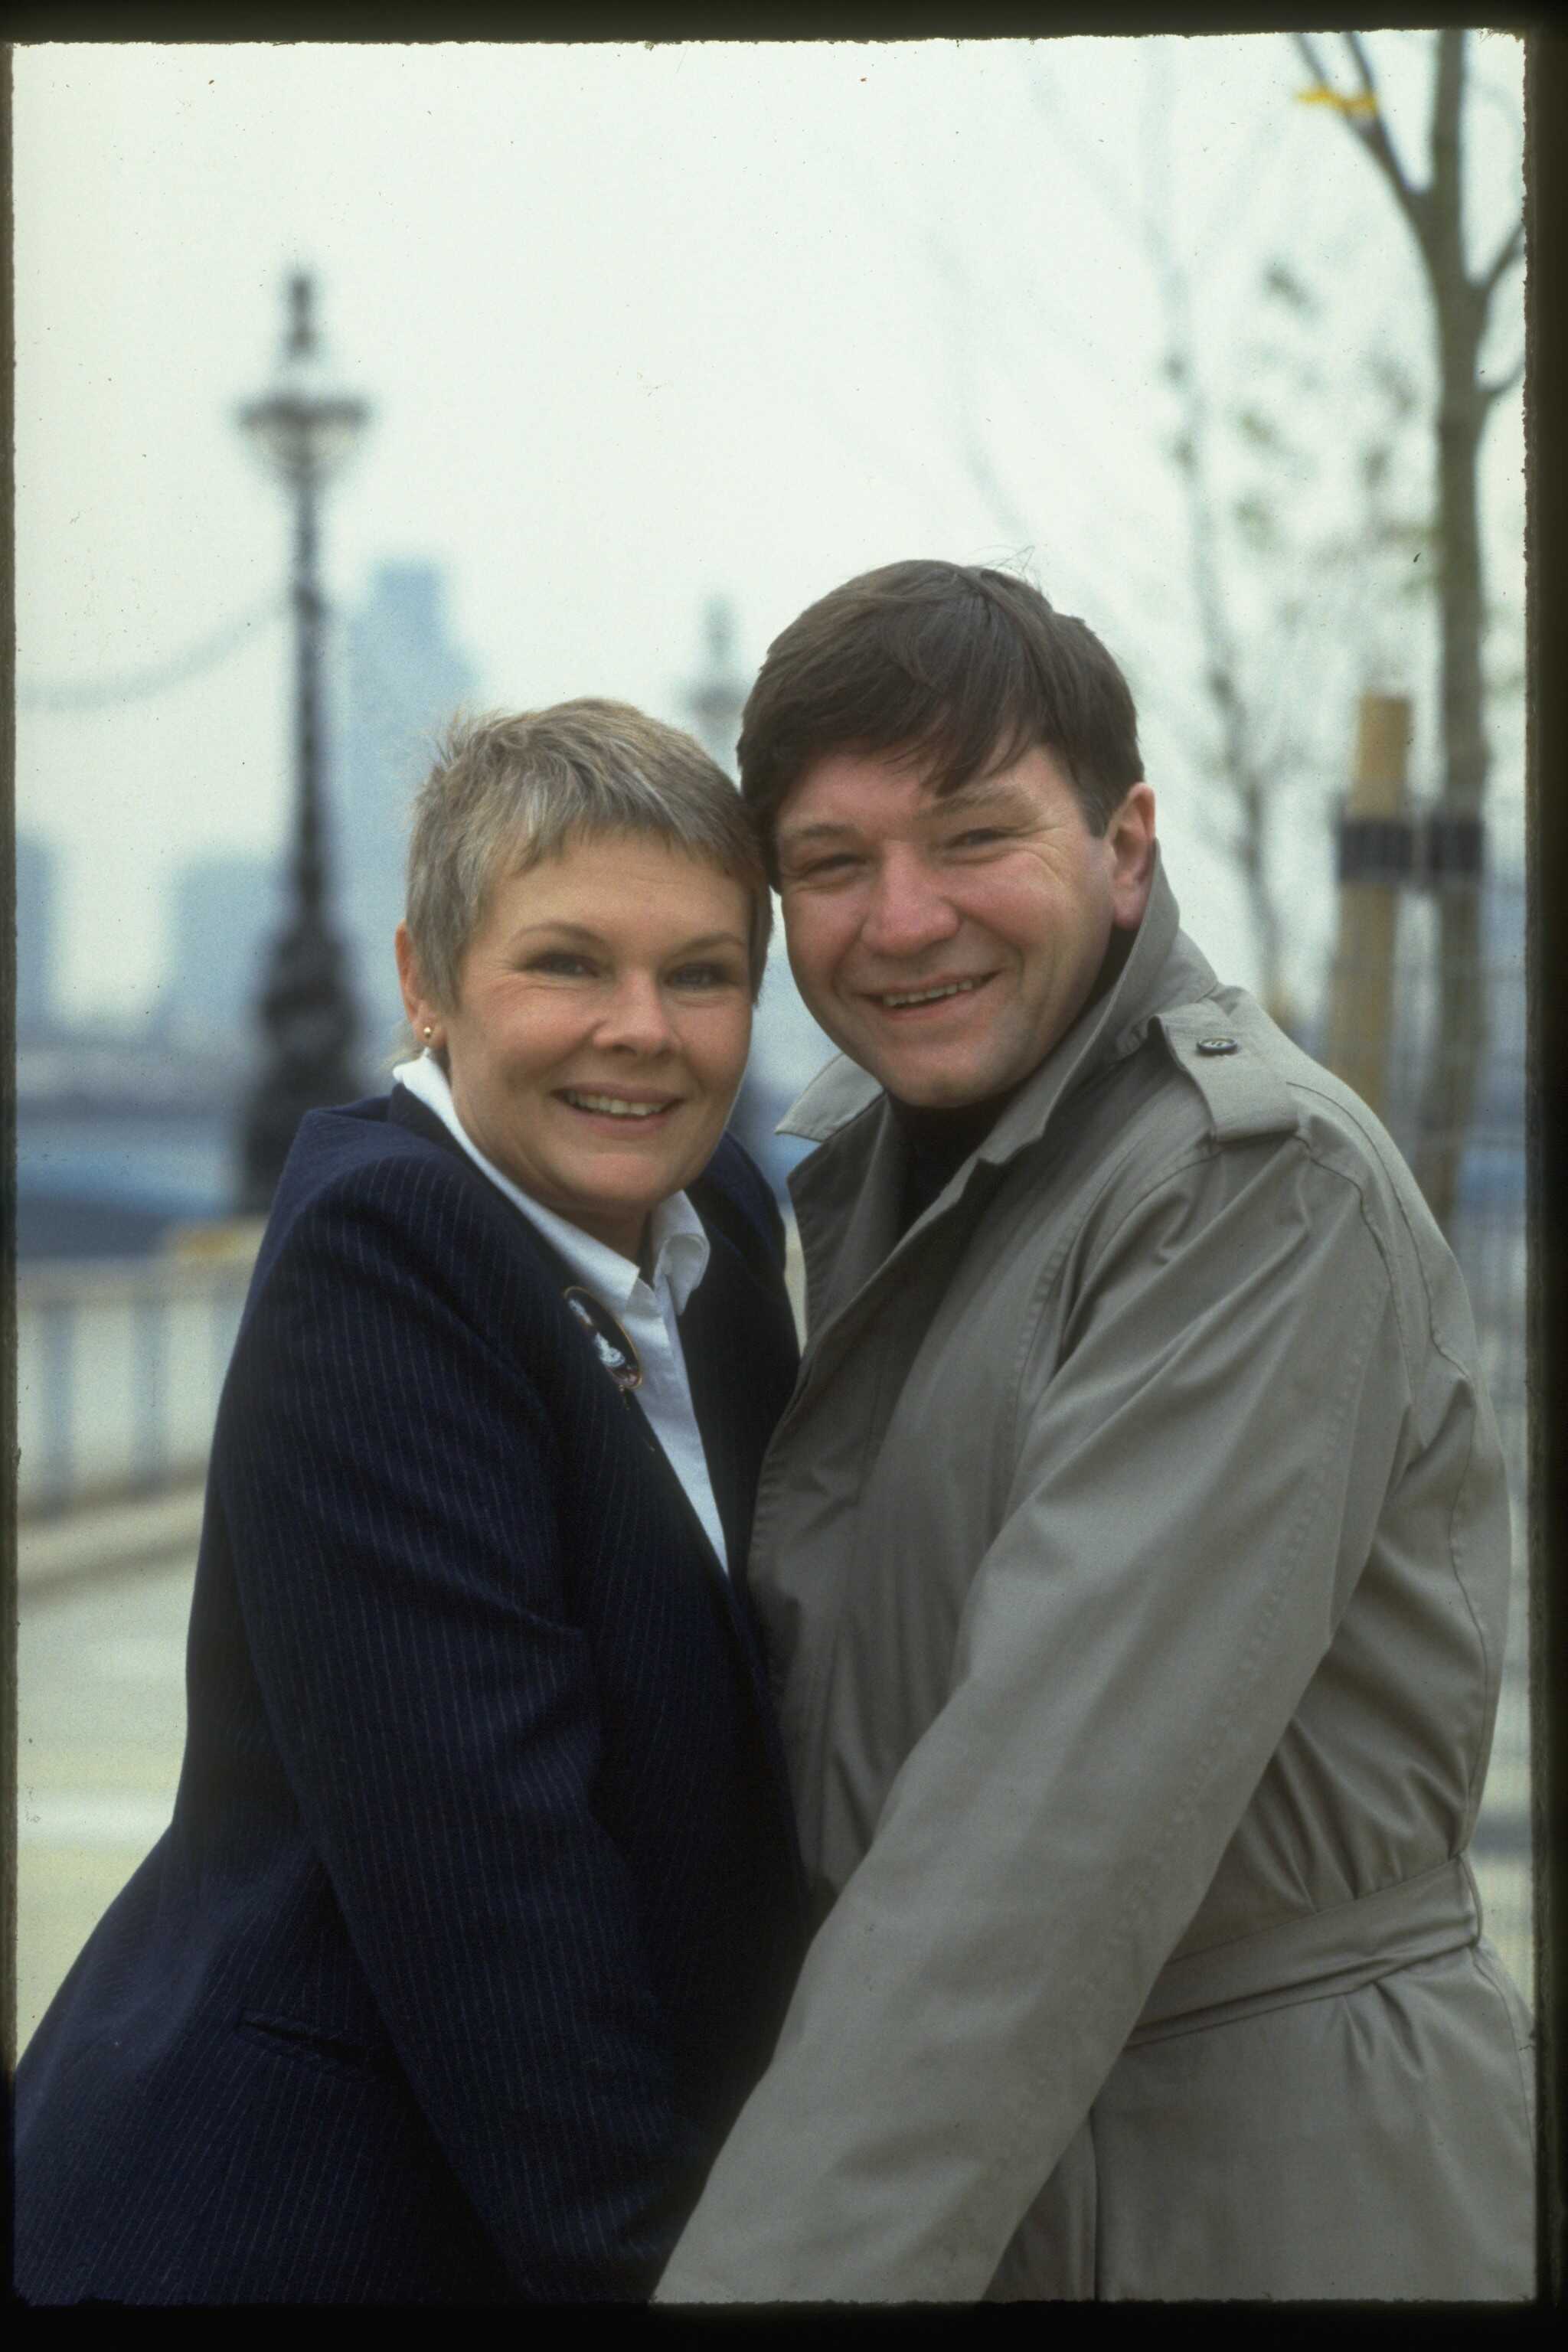 Actor Michael Williams and actress Judi Dench pictured smiling on January 1, 1983 ┃Source: Getty Images